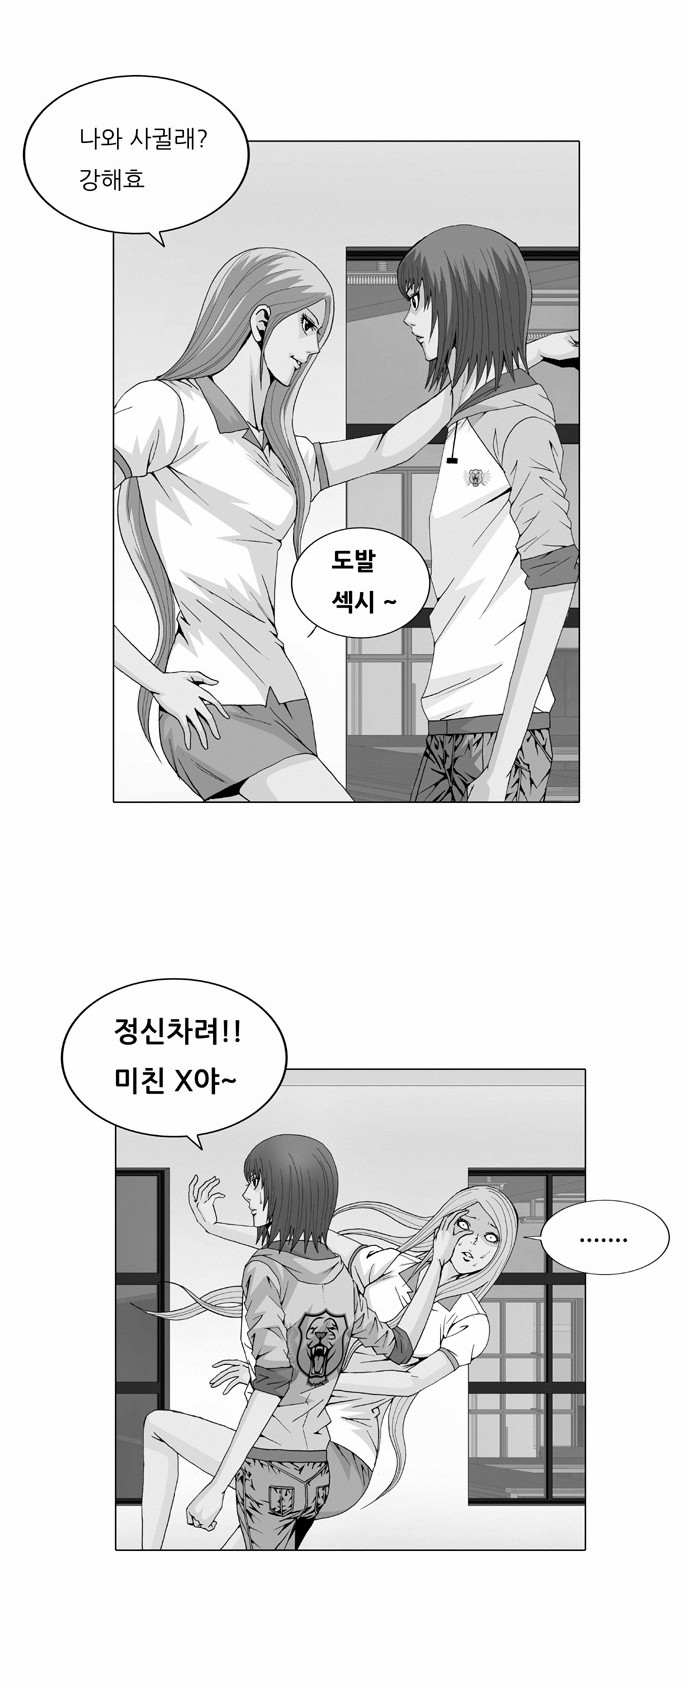 Ultimate Legend - Kang Hae Hyo - Chapter 30 - Page 2